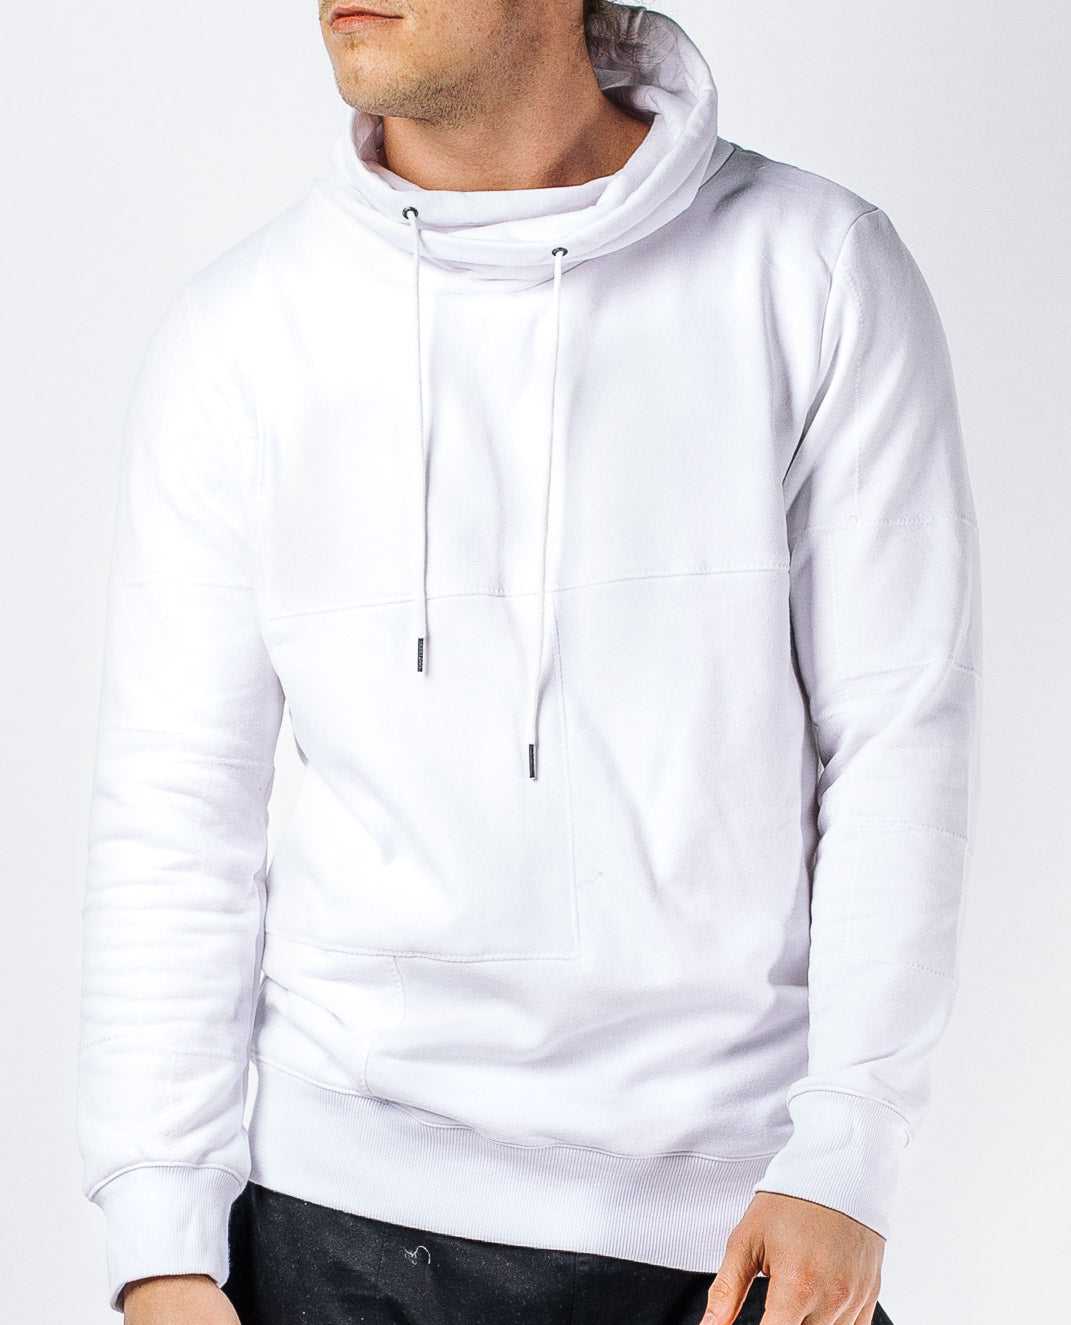 Modern Comfort with High Style and Design. Fine attention to detail with amazing stitching. Pisa Patchwork Hoodie